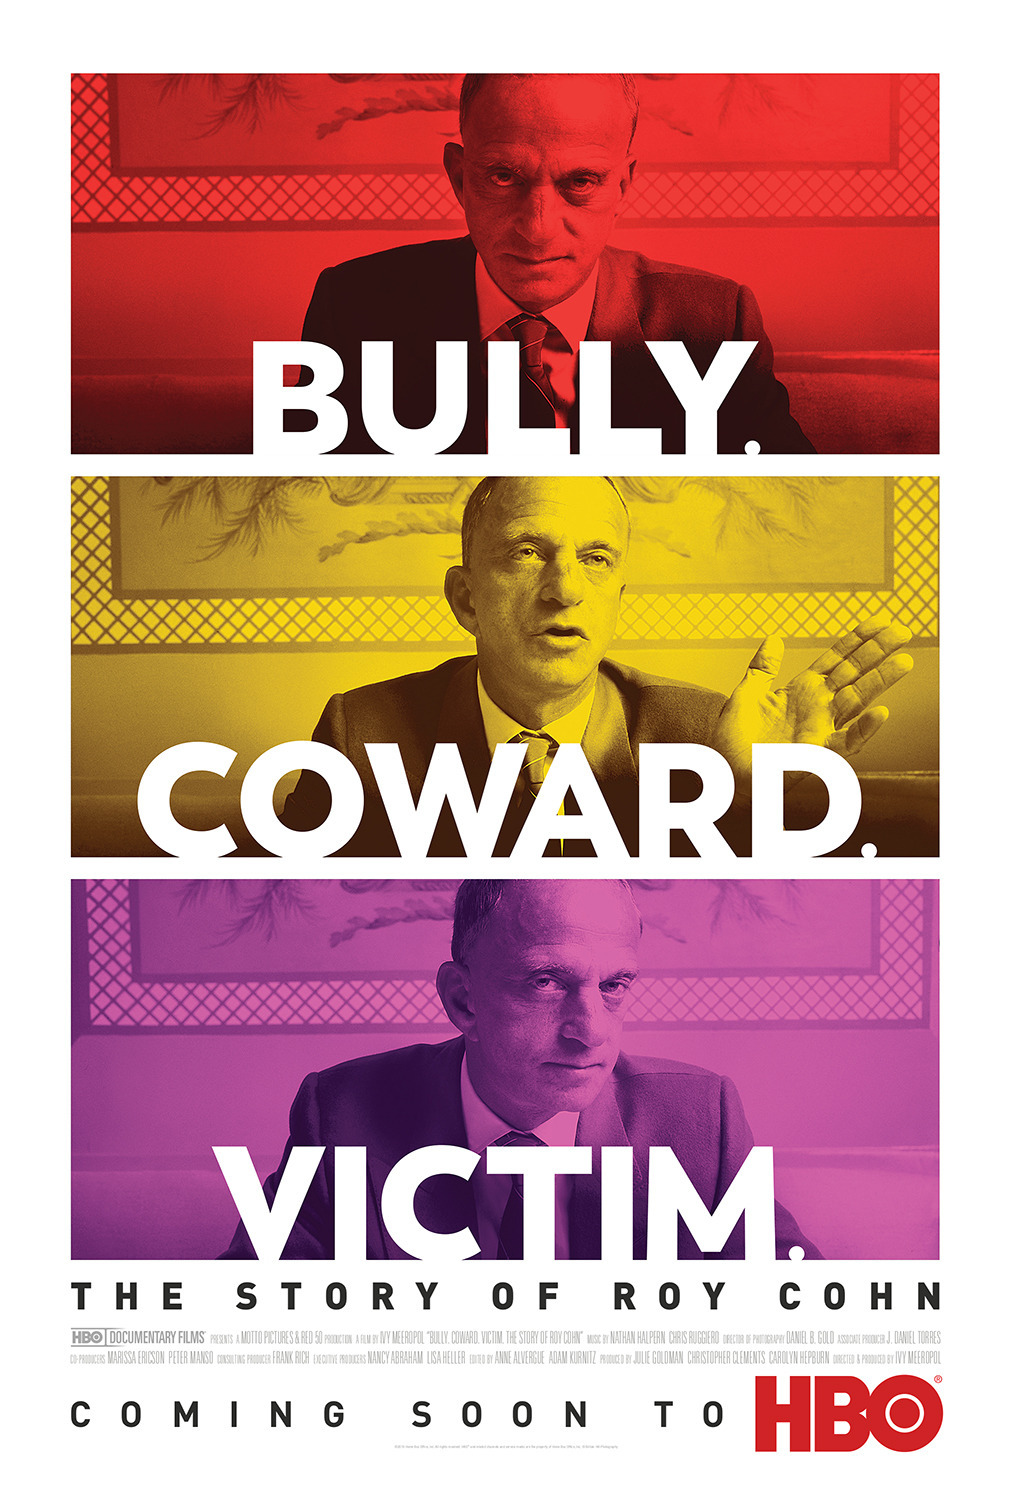 Extra Large TV Poster Image for Bully. Coward. Victim. The Story of Roy Cohn 